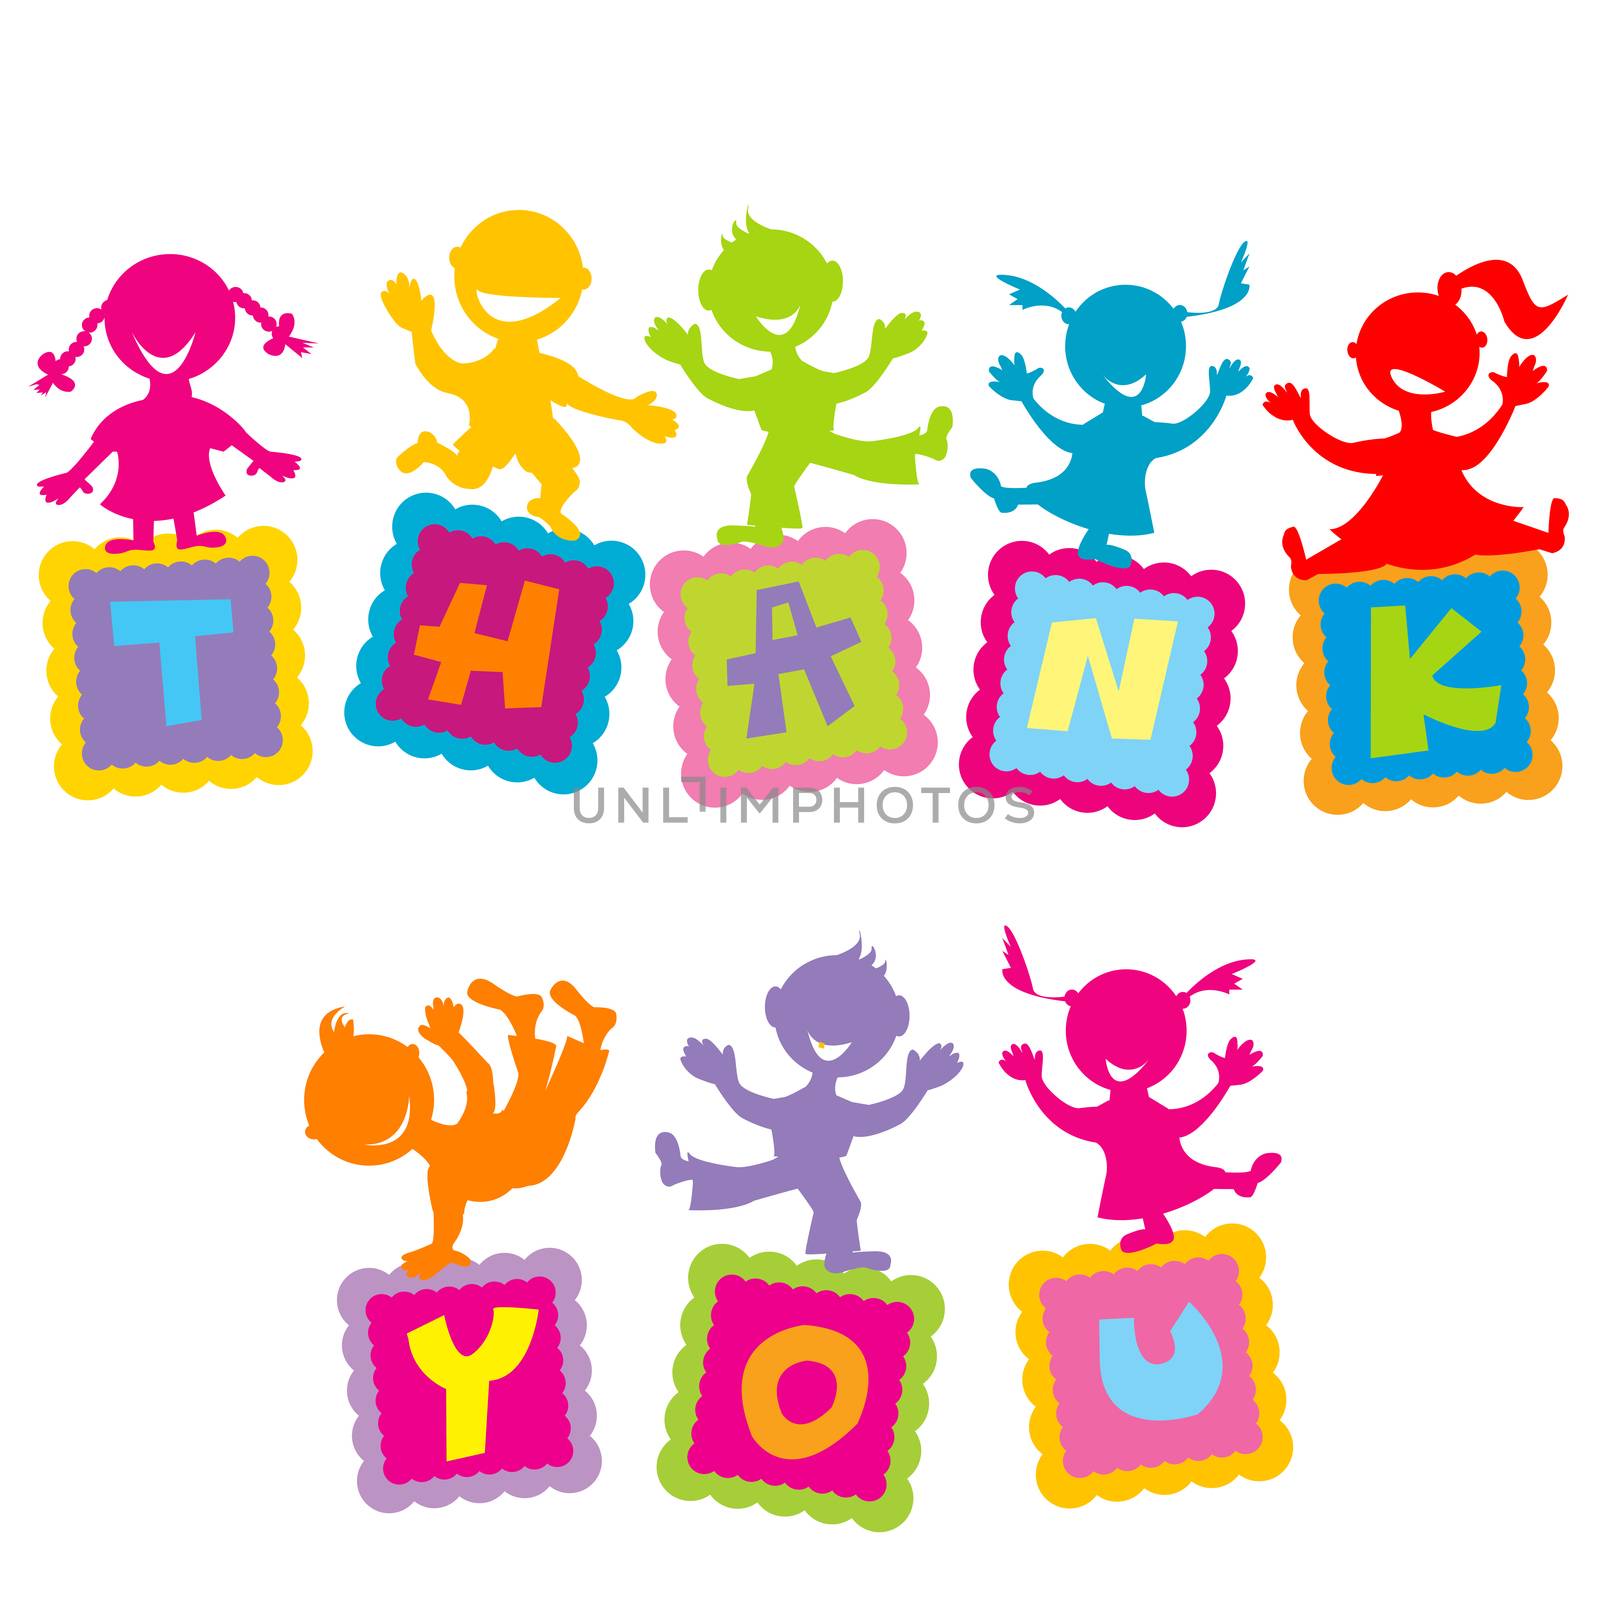 Thank you card with cartoon kids by hibrida13